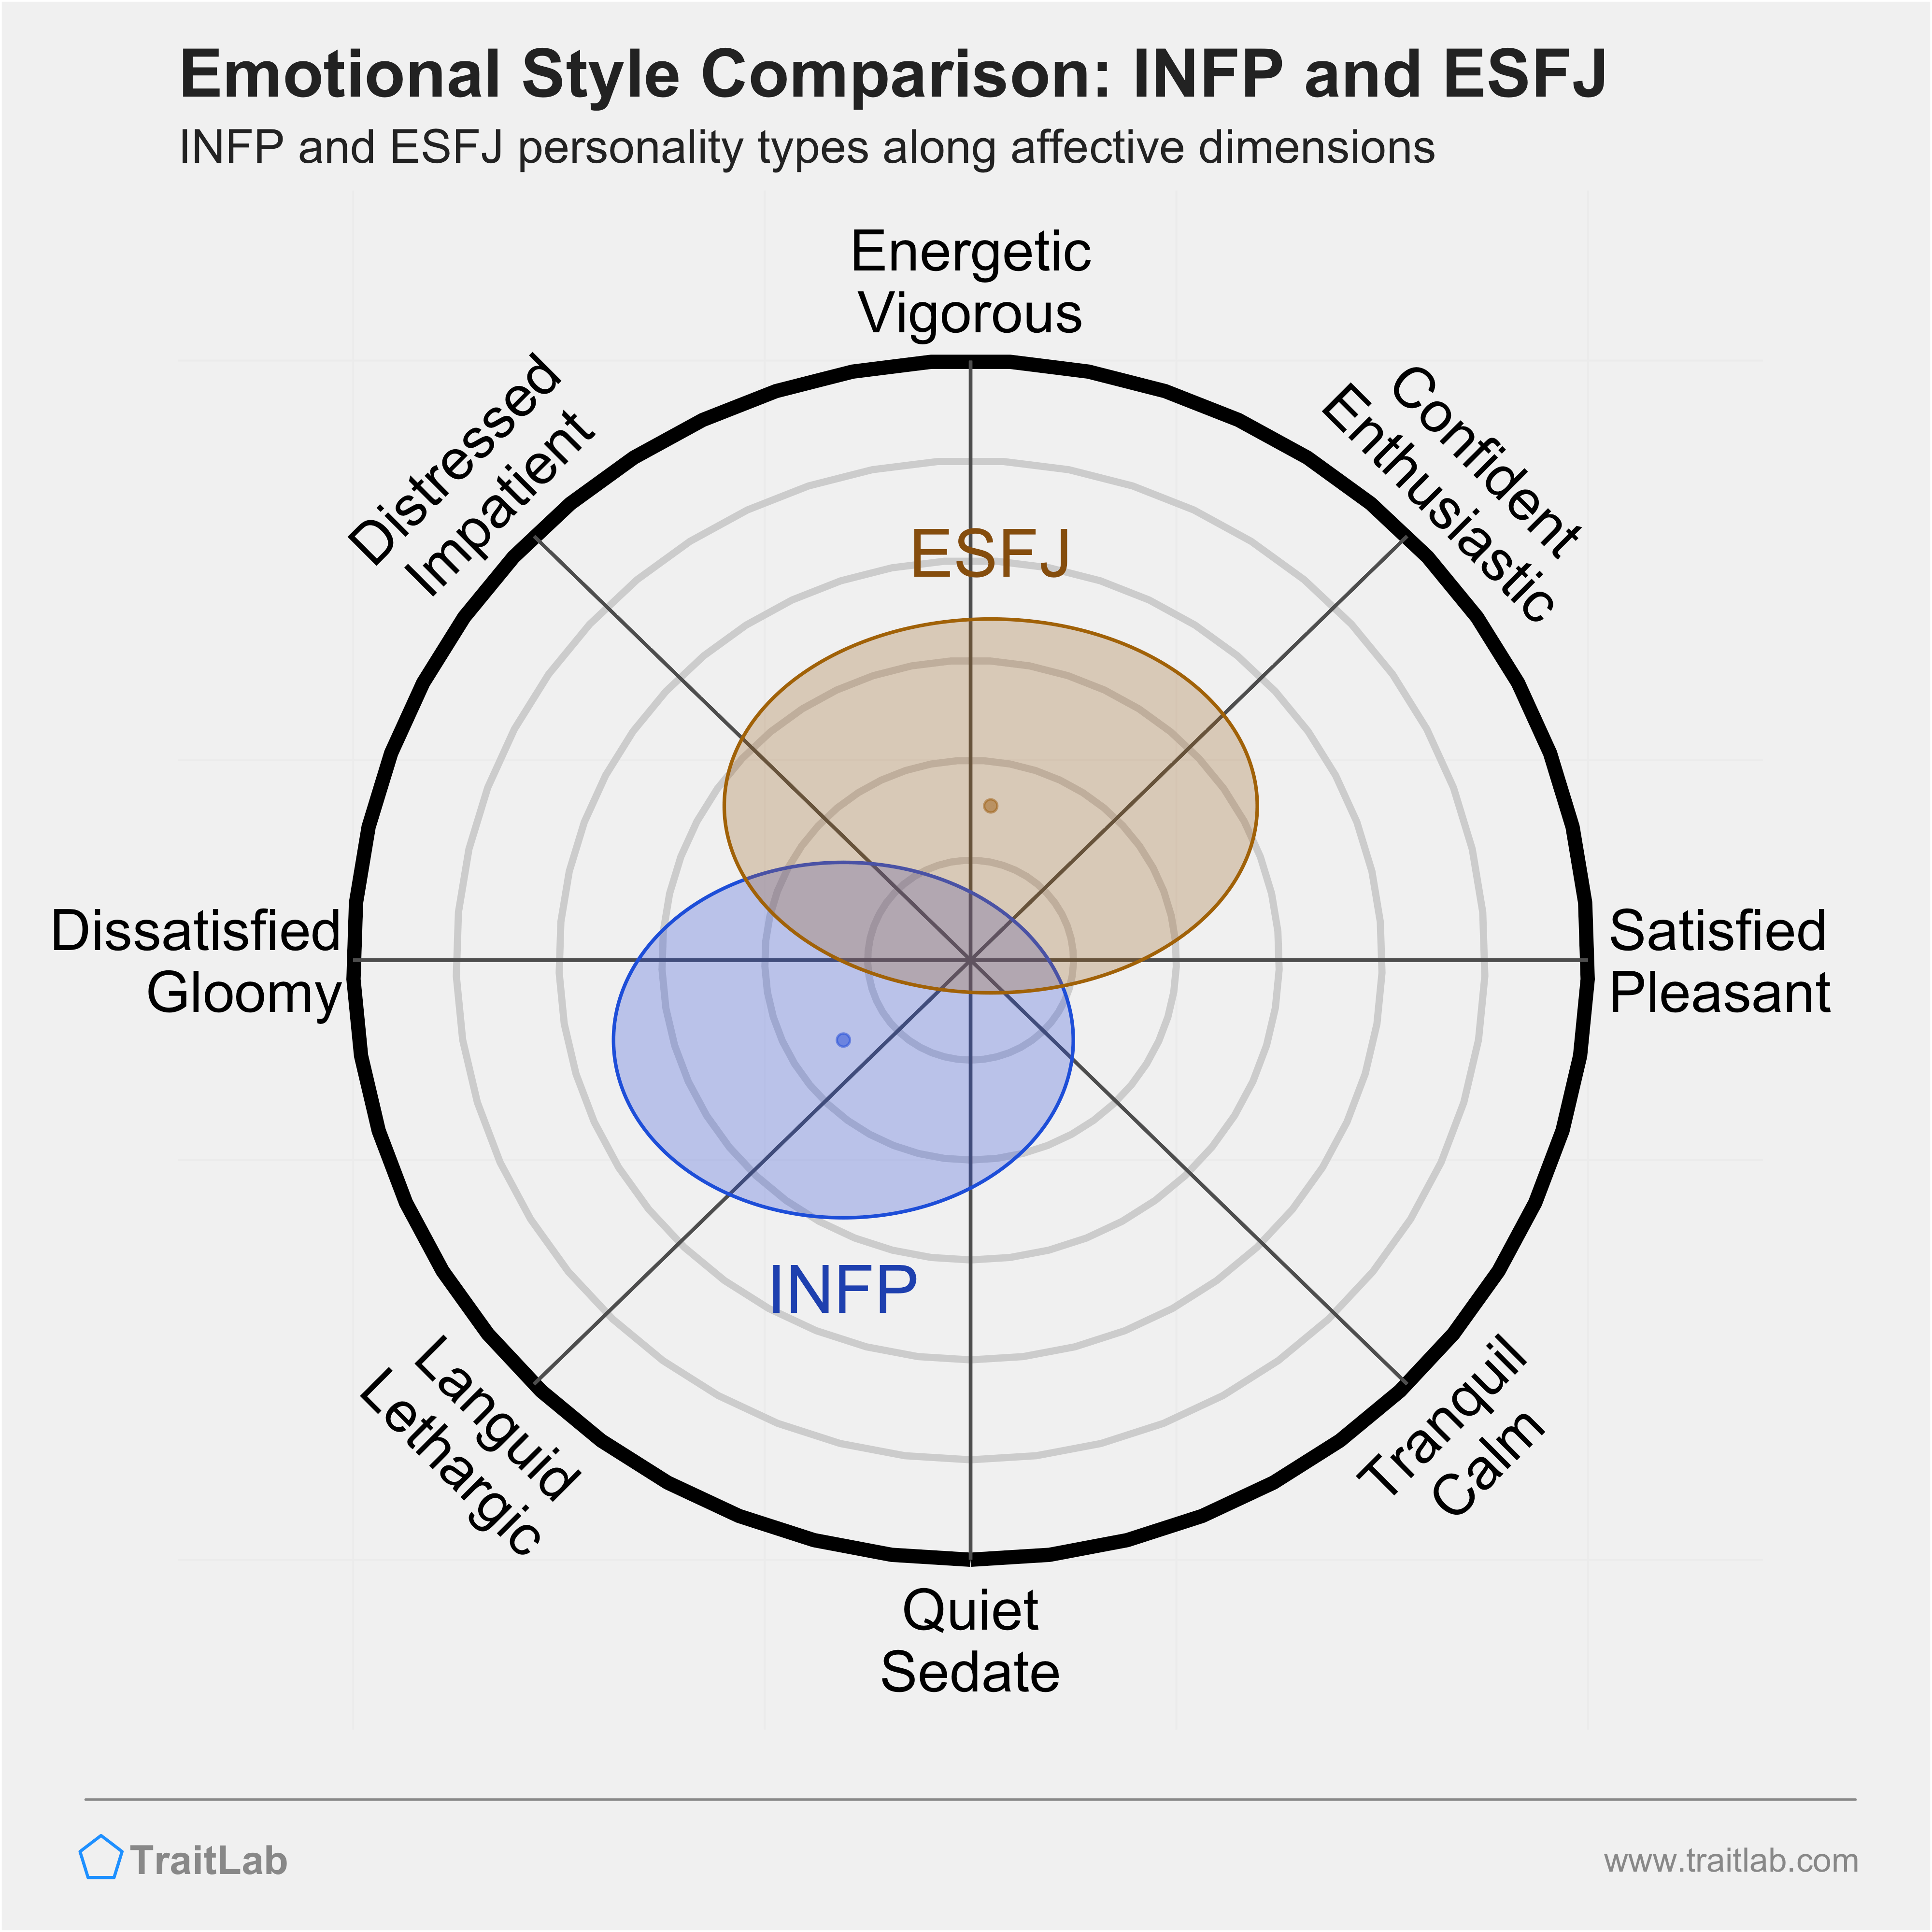 INFP and ESFJ comparison across emotional (affective) dimensions